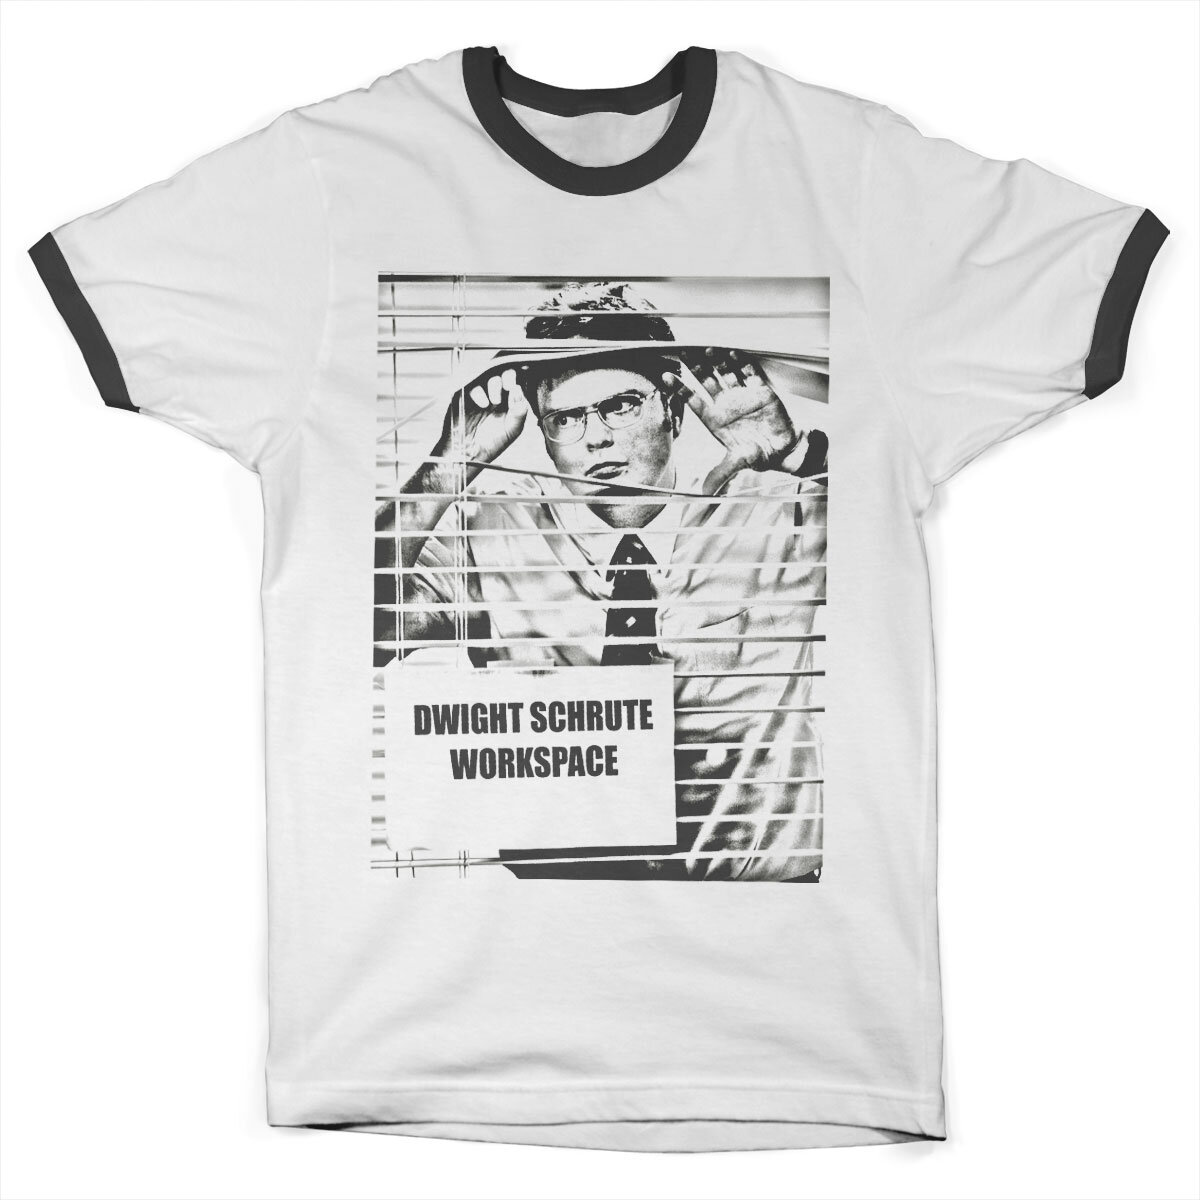 Dwight Schrute Workspace Ringer Tee